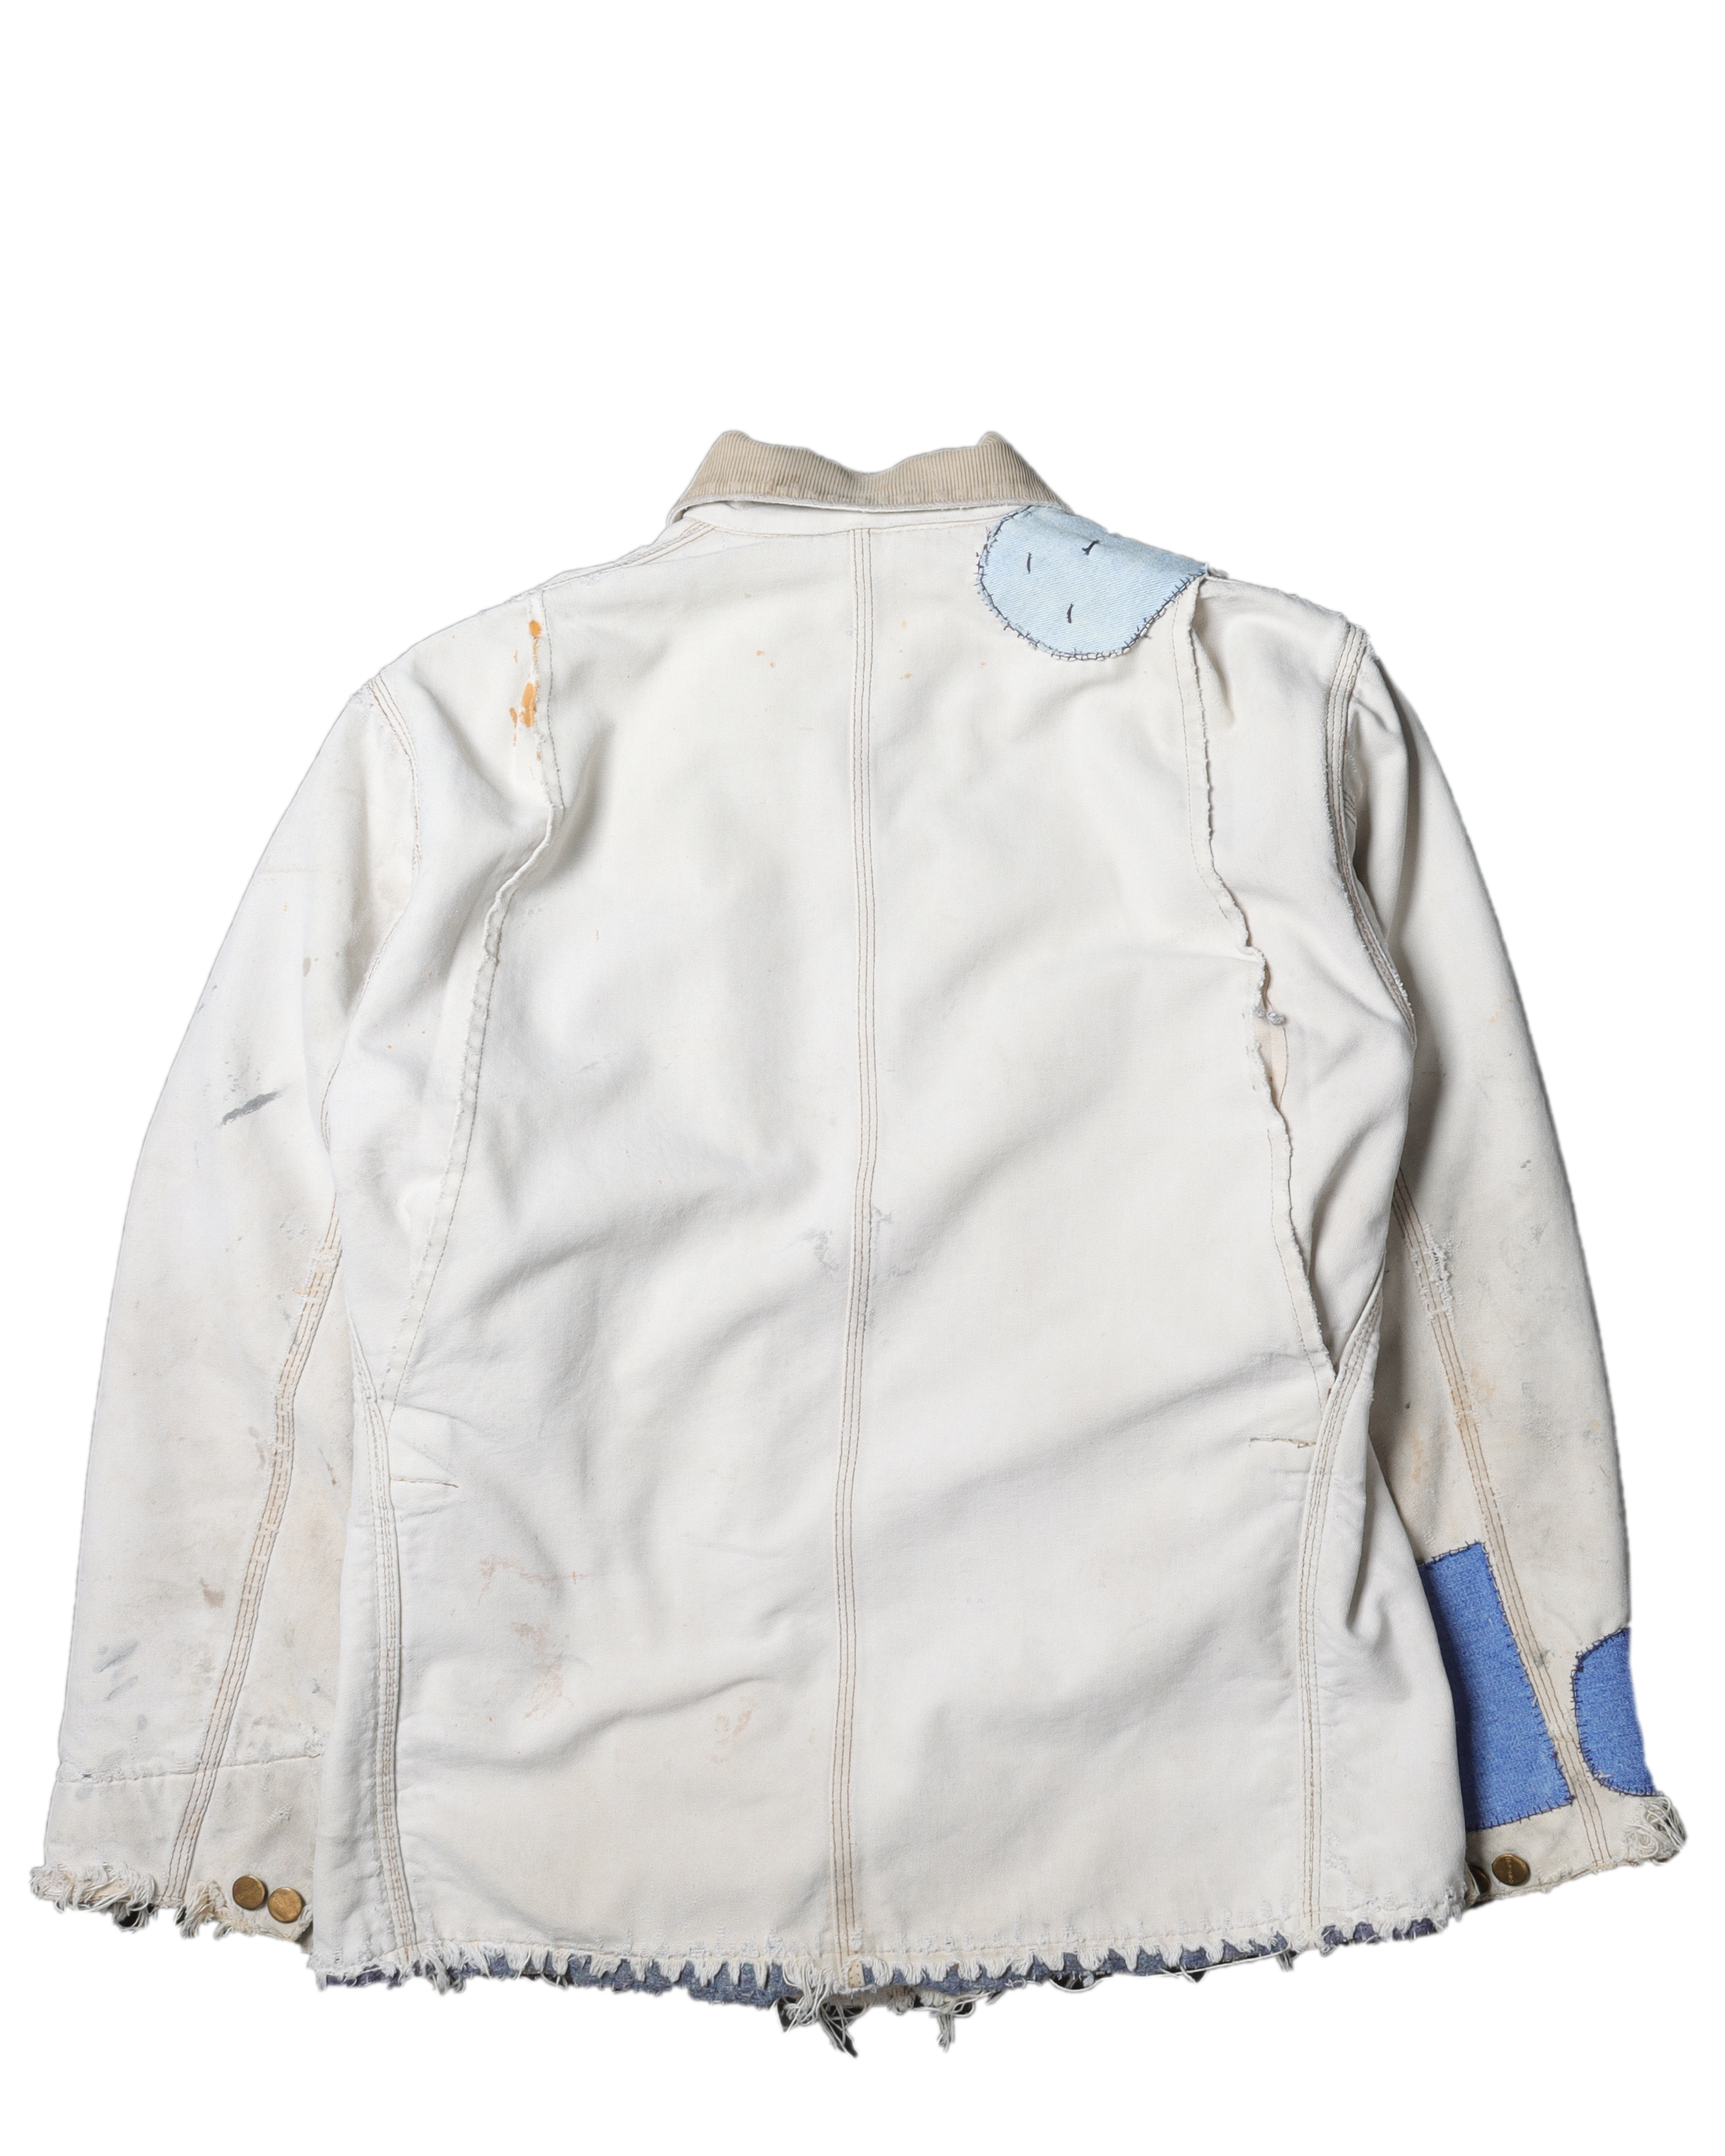 Carhartt Patched Blanket-Lined Work Jacket